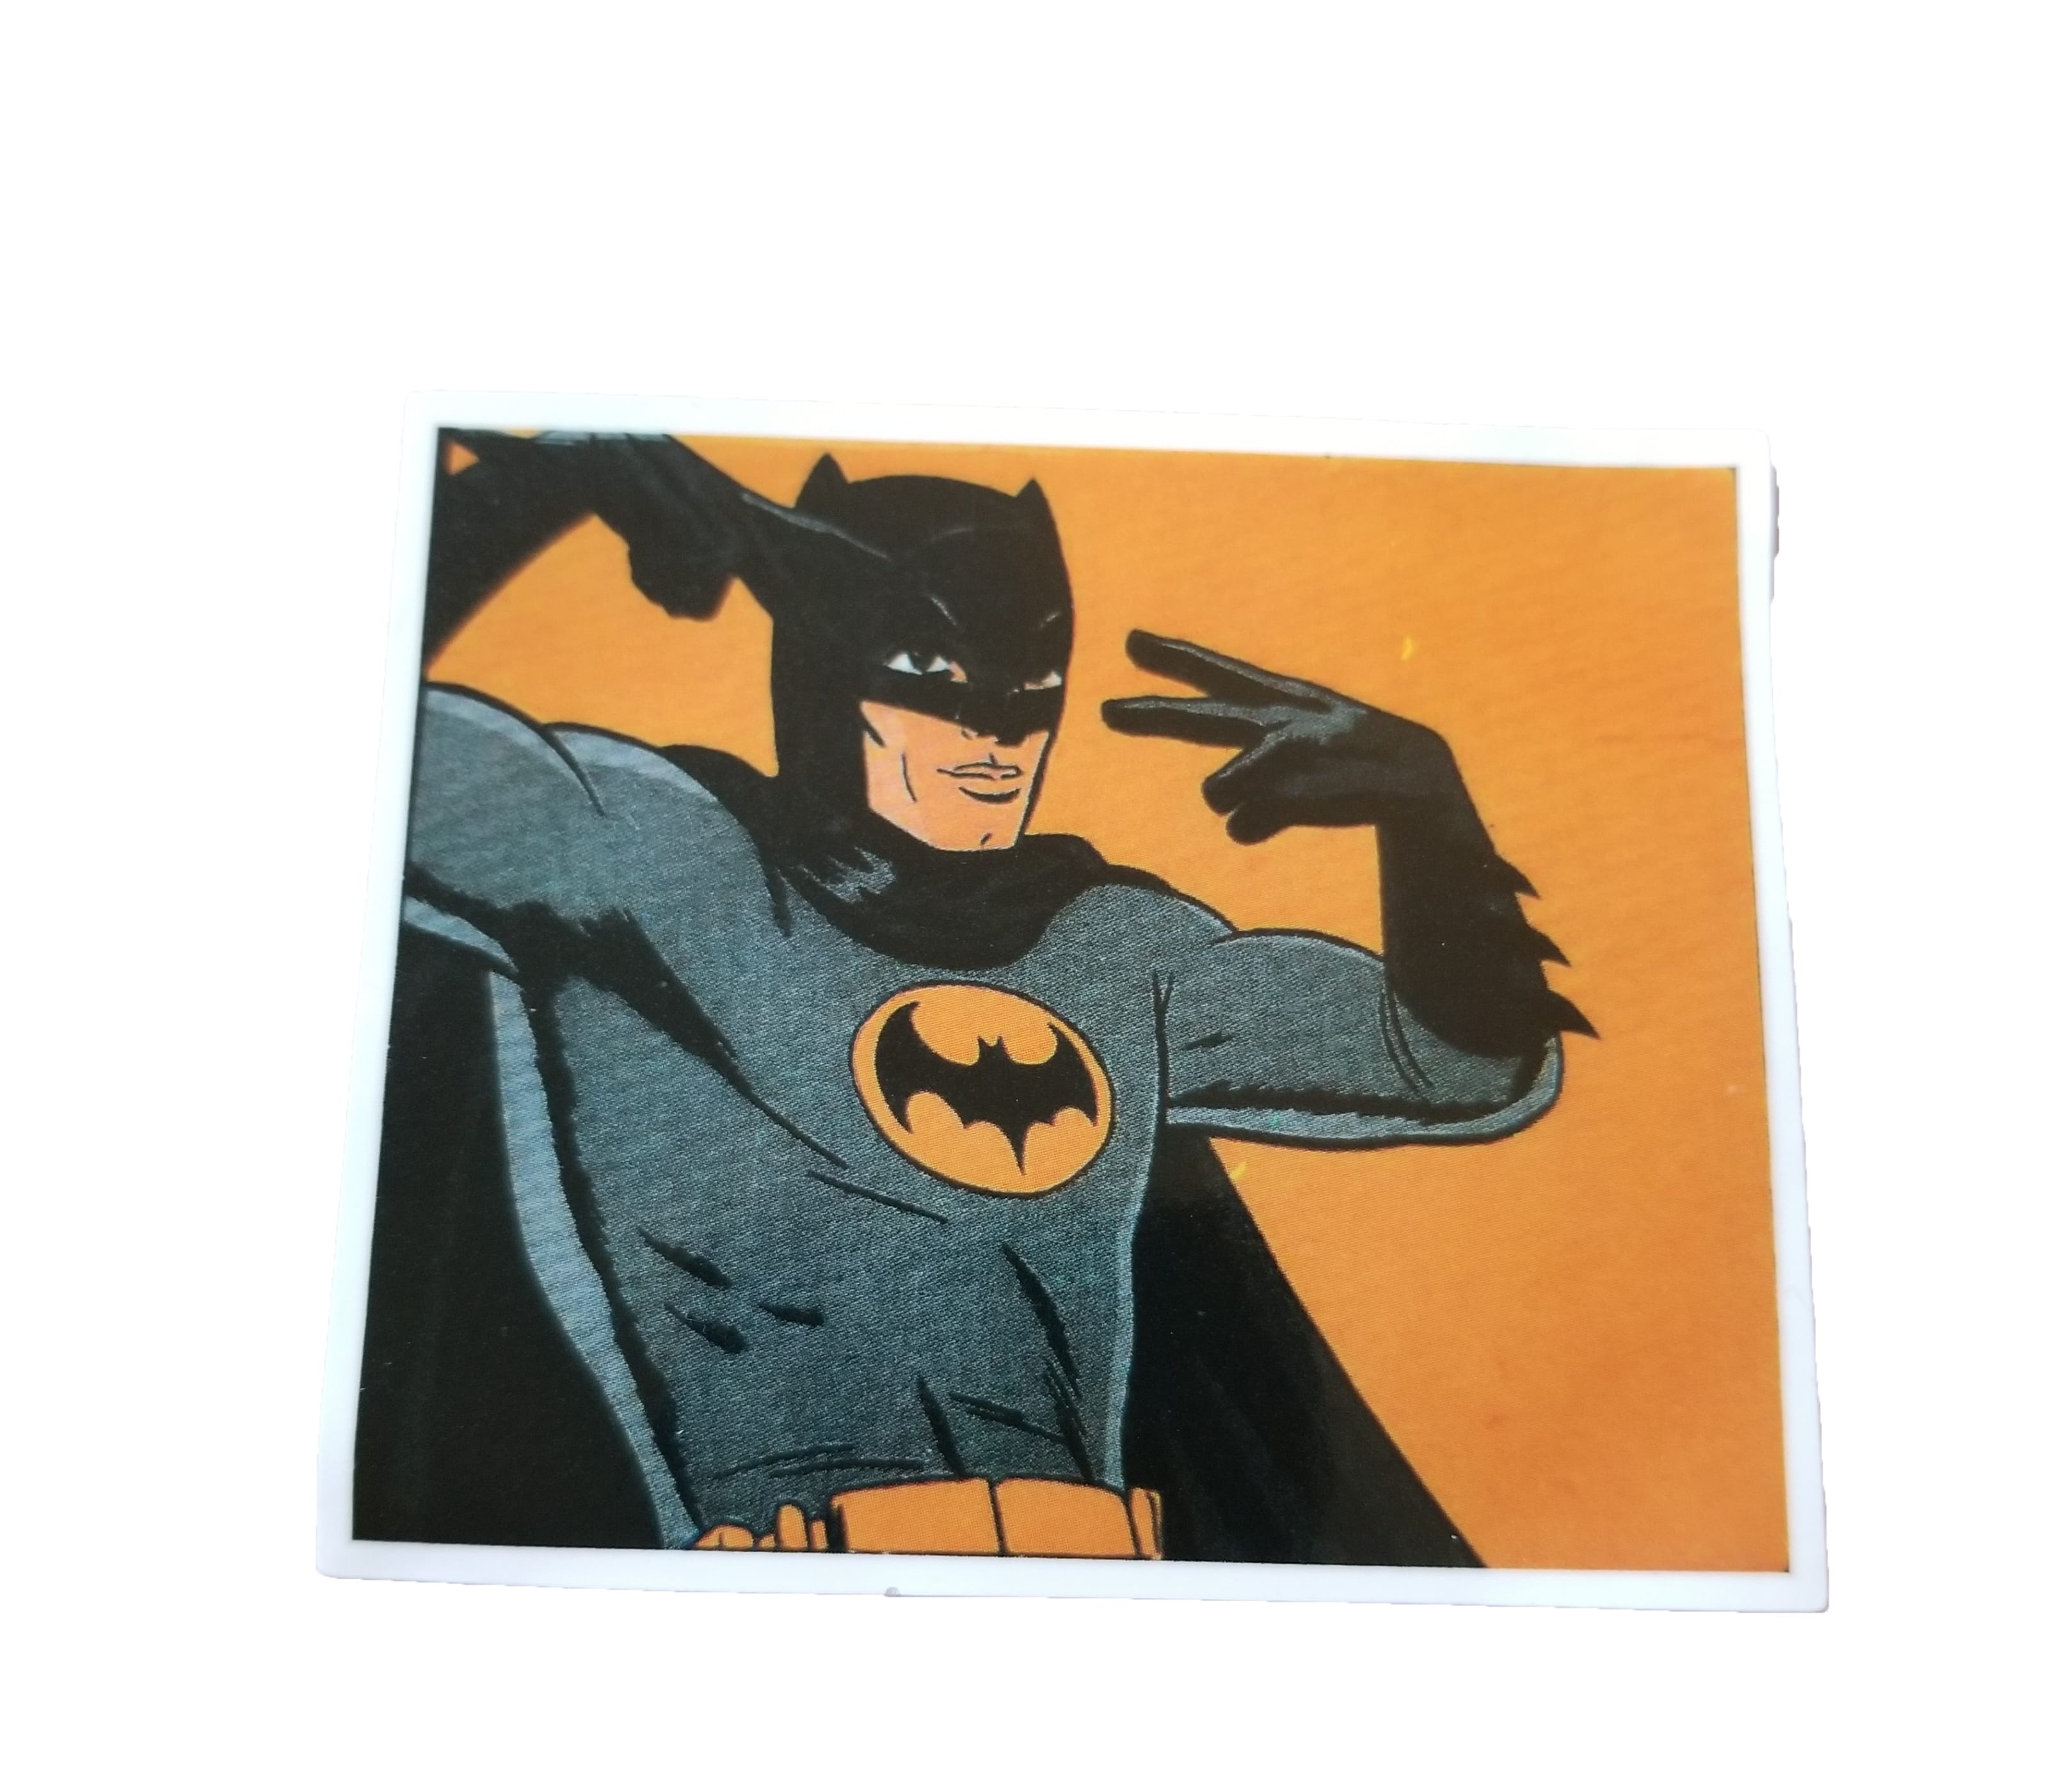 Retro Picture of Batman throwing up peace signs